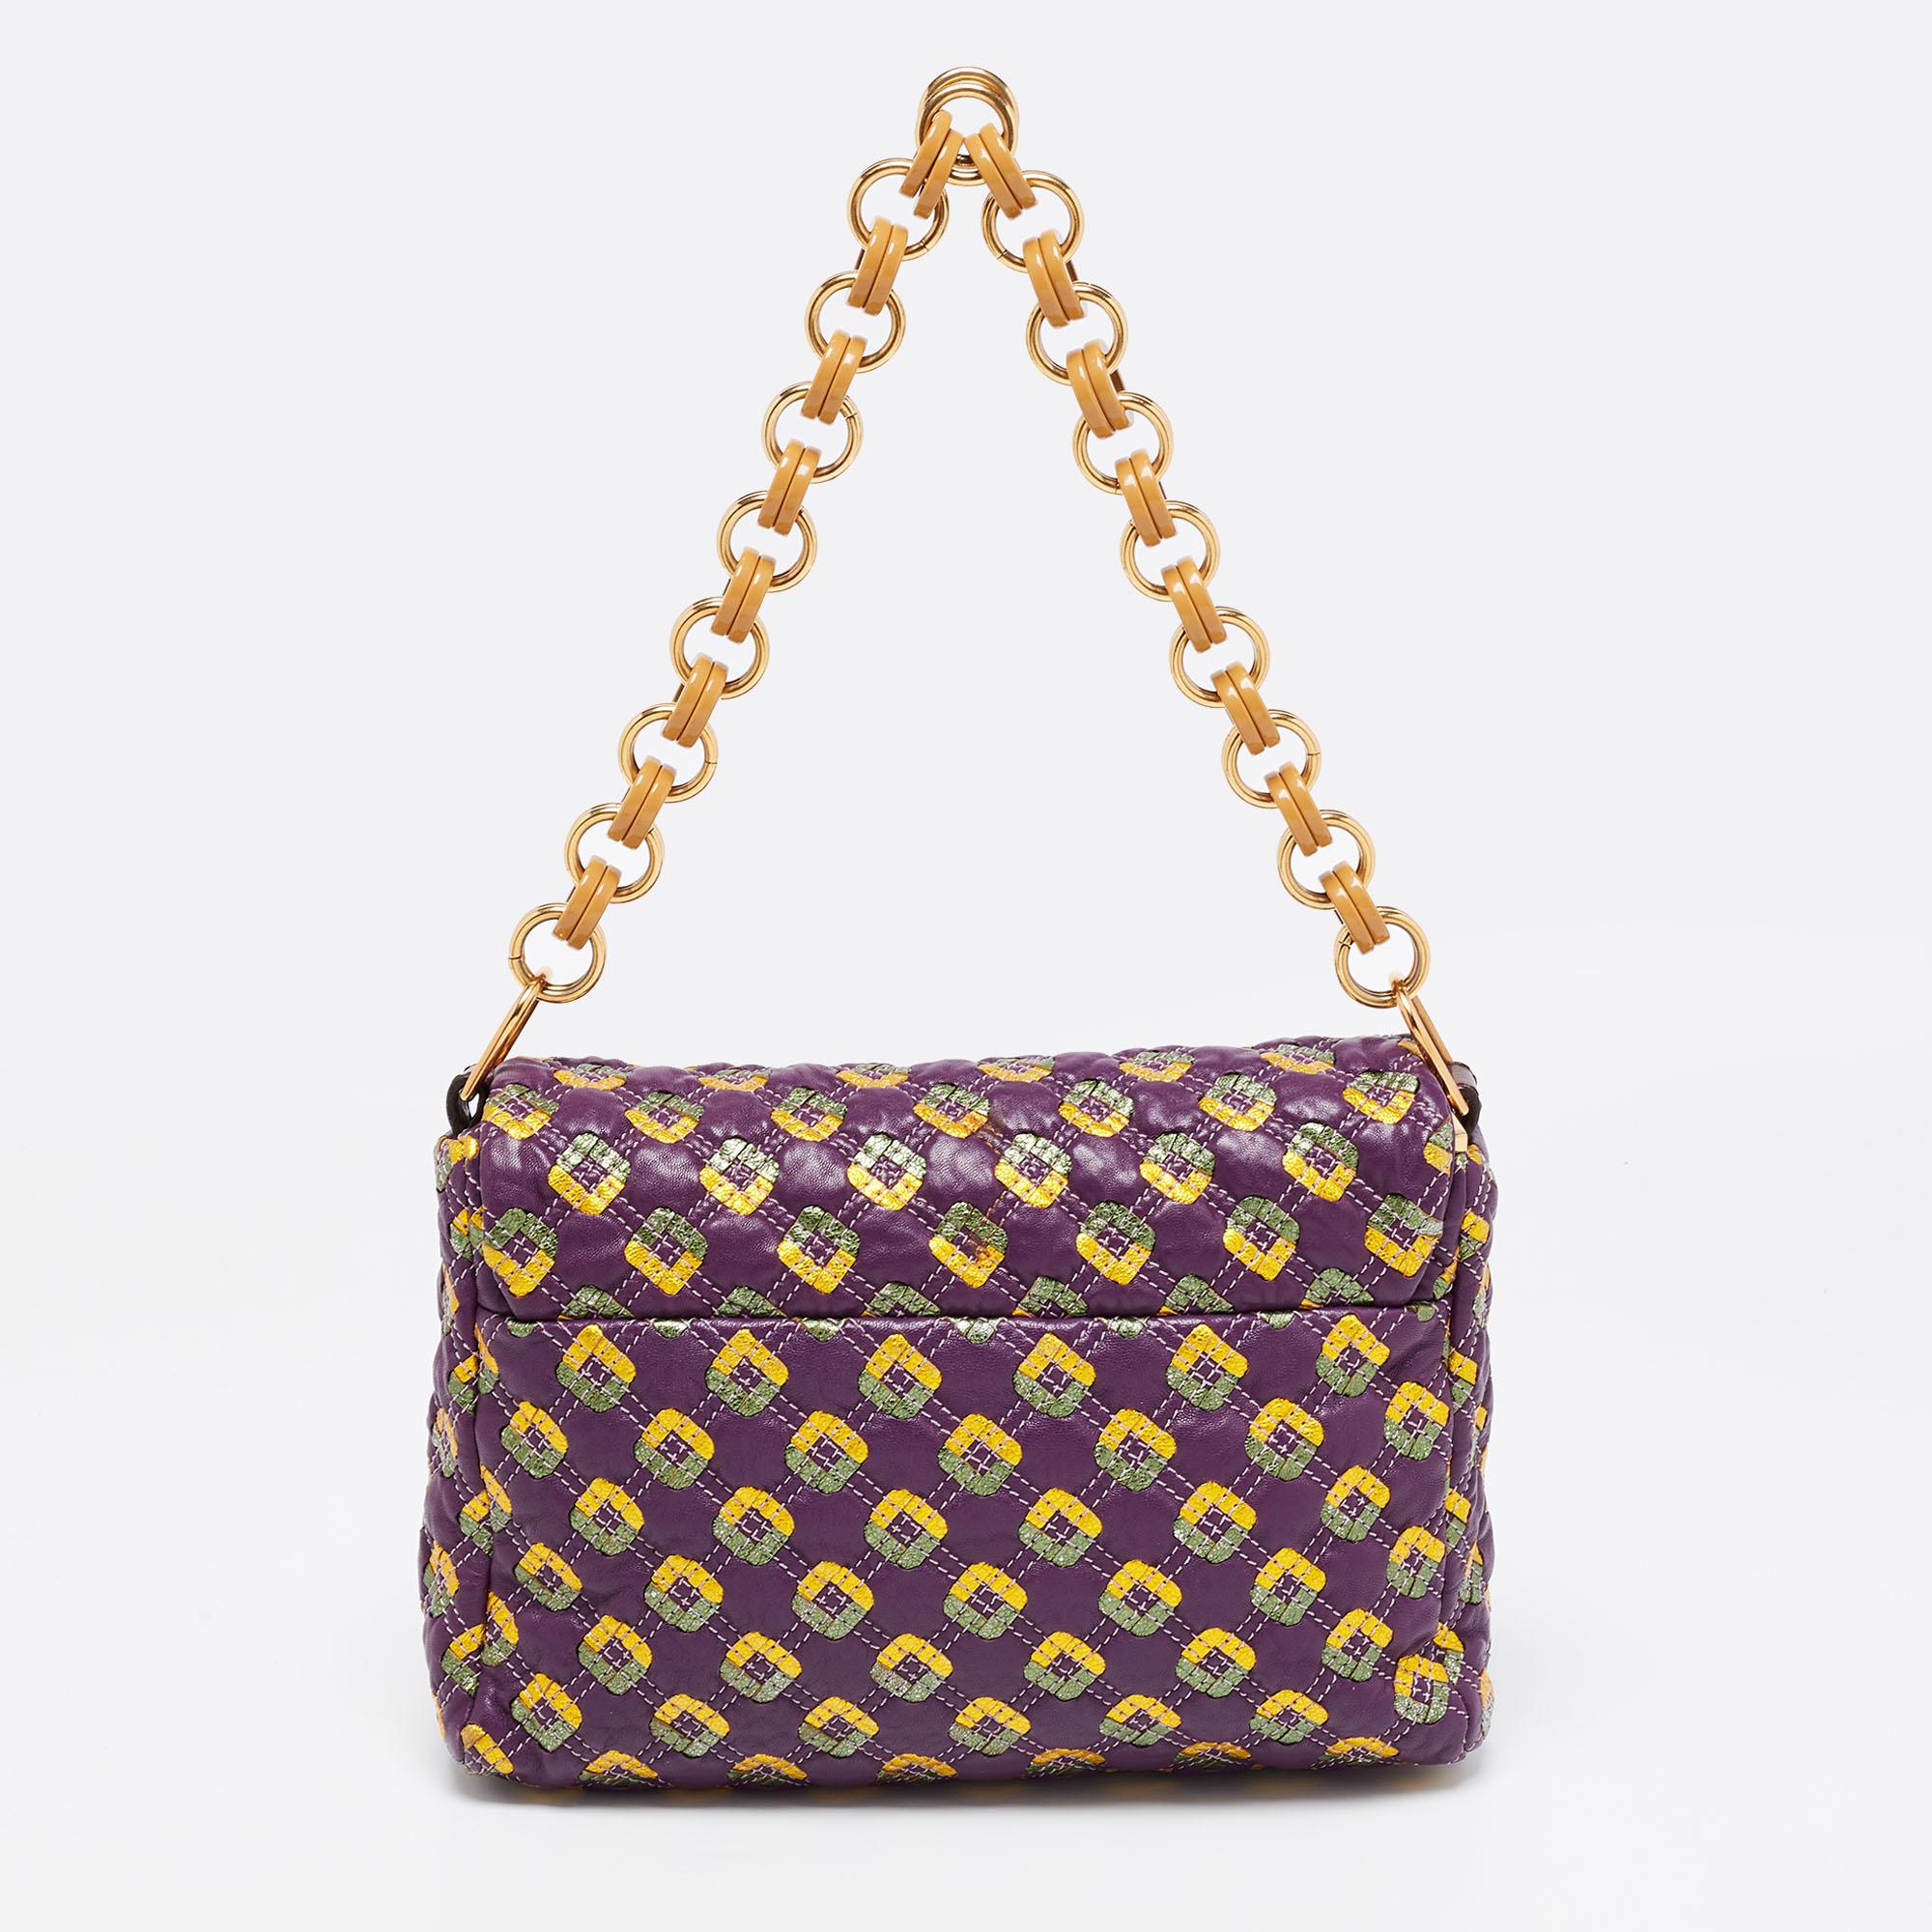 A stunning leather bag to look fashionable this season. Get yourself this pretty purple bag now! Coming from the house of Marc Jacobs, the shoulder bag features prints and quilting all over its exterior. It is complete with a single, chunky handle